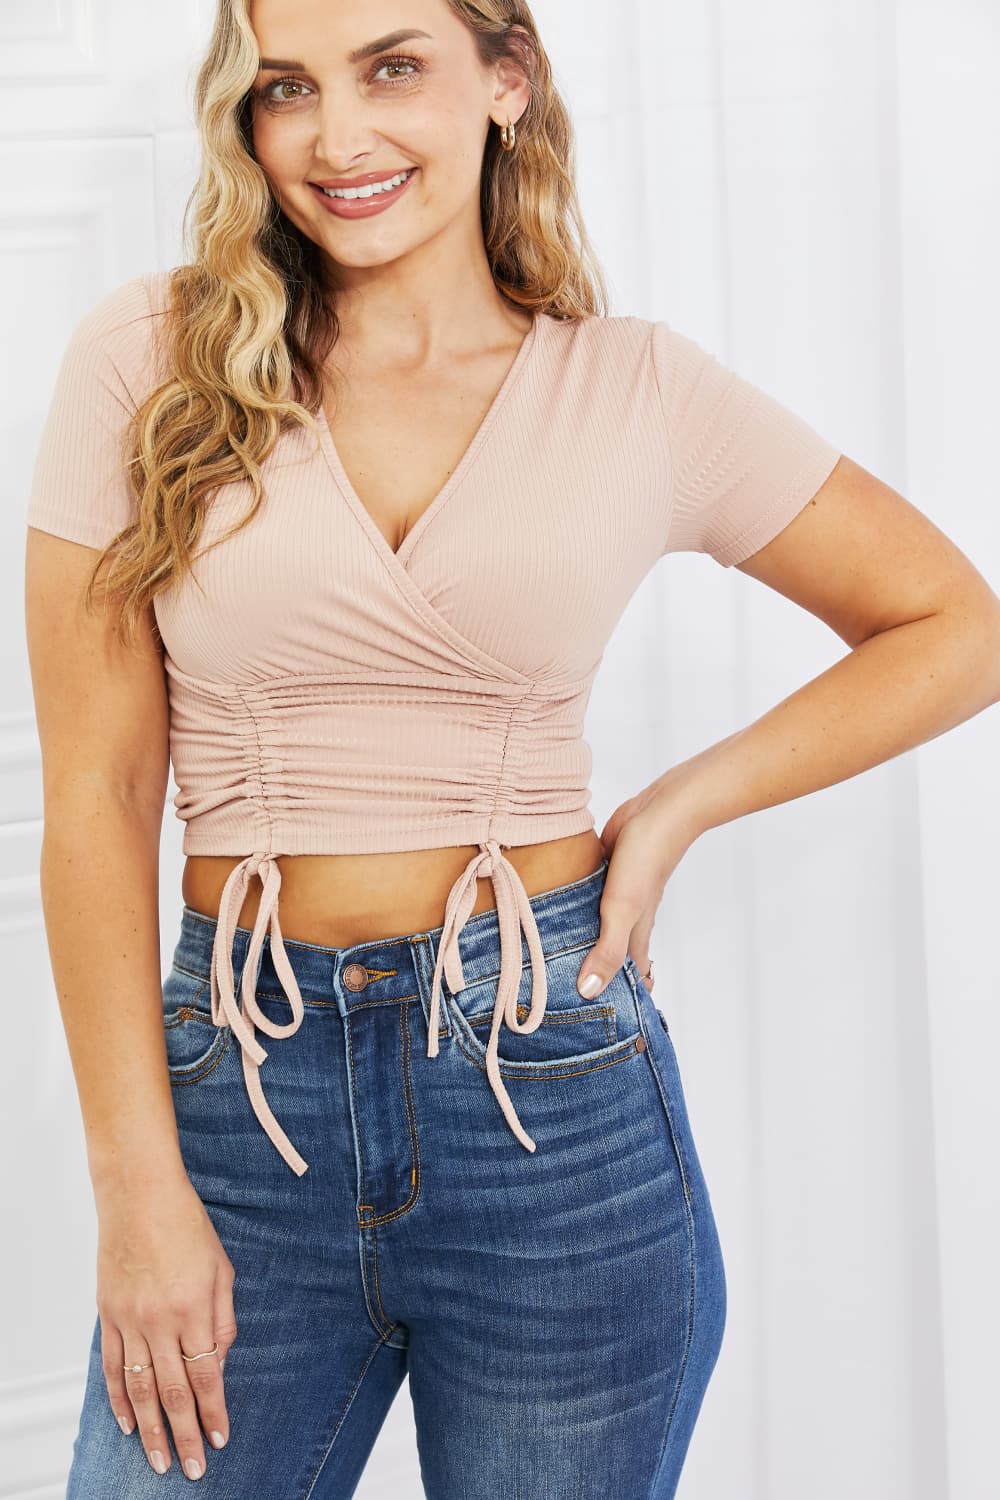 Back To Simple Full Size Ribbed Front Scrunched Top in Blush - Women’s Clothing & Accessories - Shirts & Tops - 10